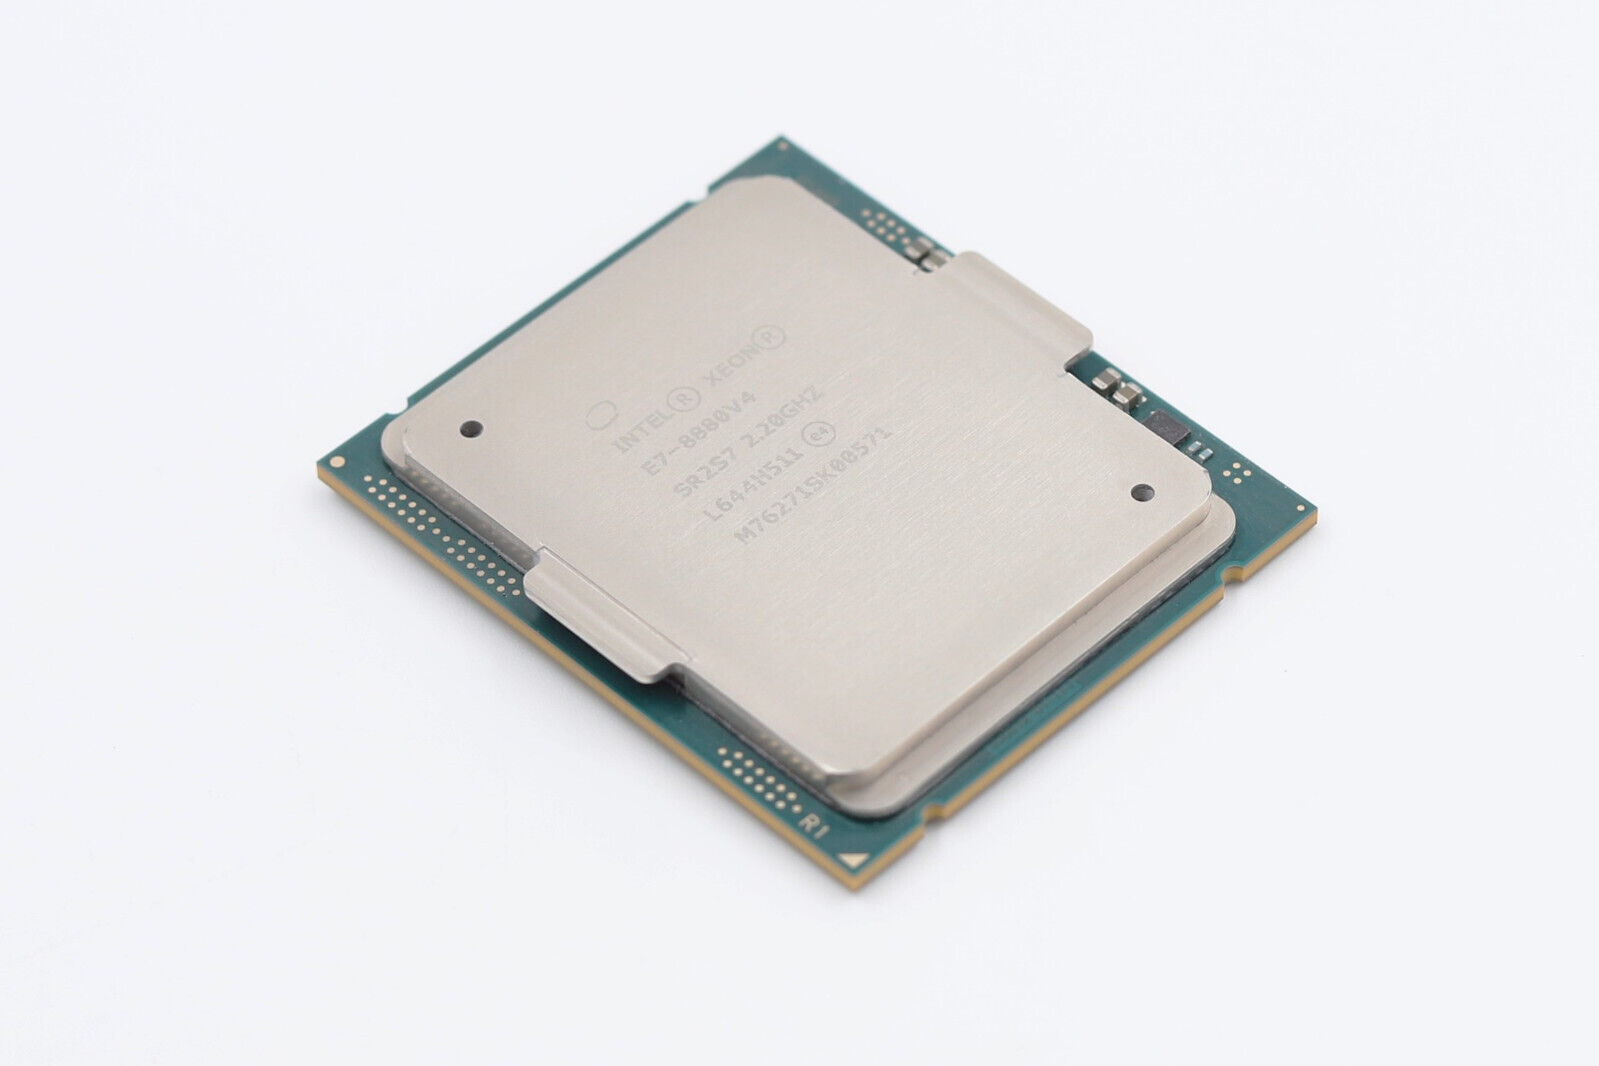 Intel Xeon E7-8880V4 2.20GHz 22-Core 55MB LGA 2011 CPU P/N: SR2S7 Tested Working